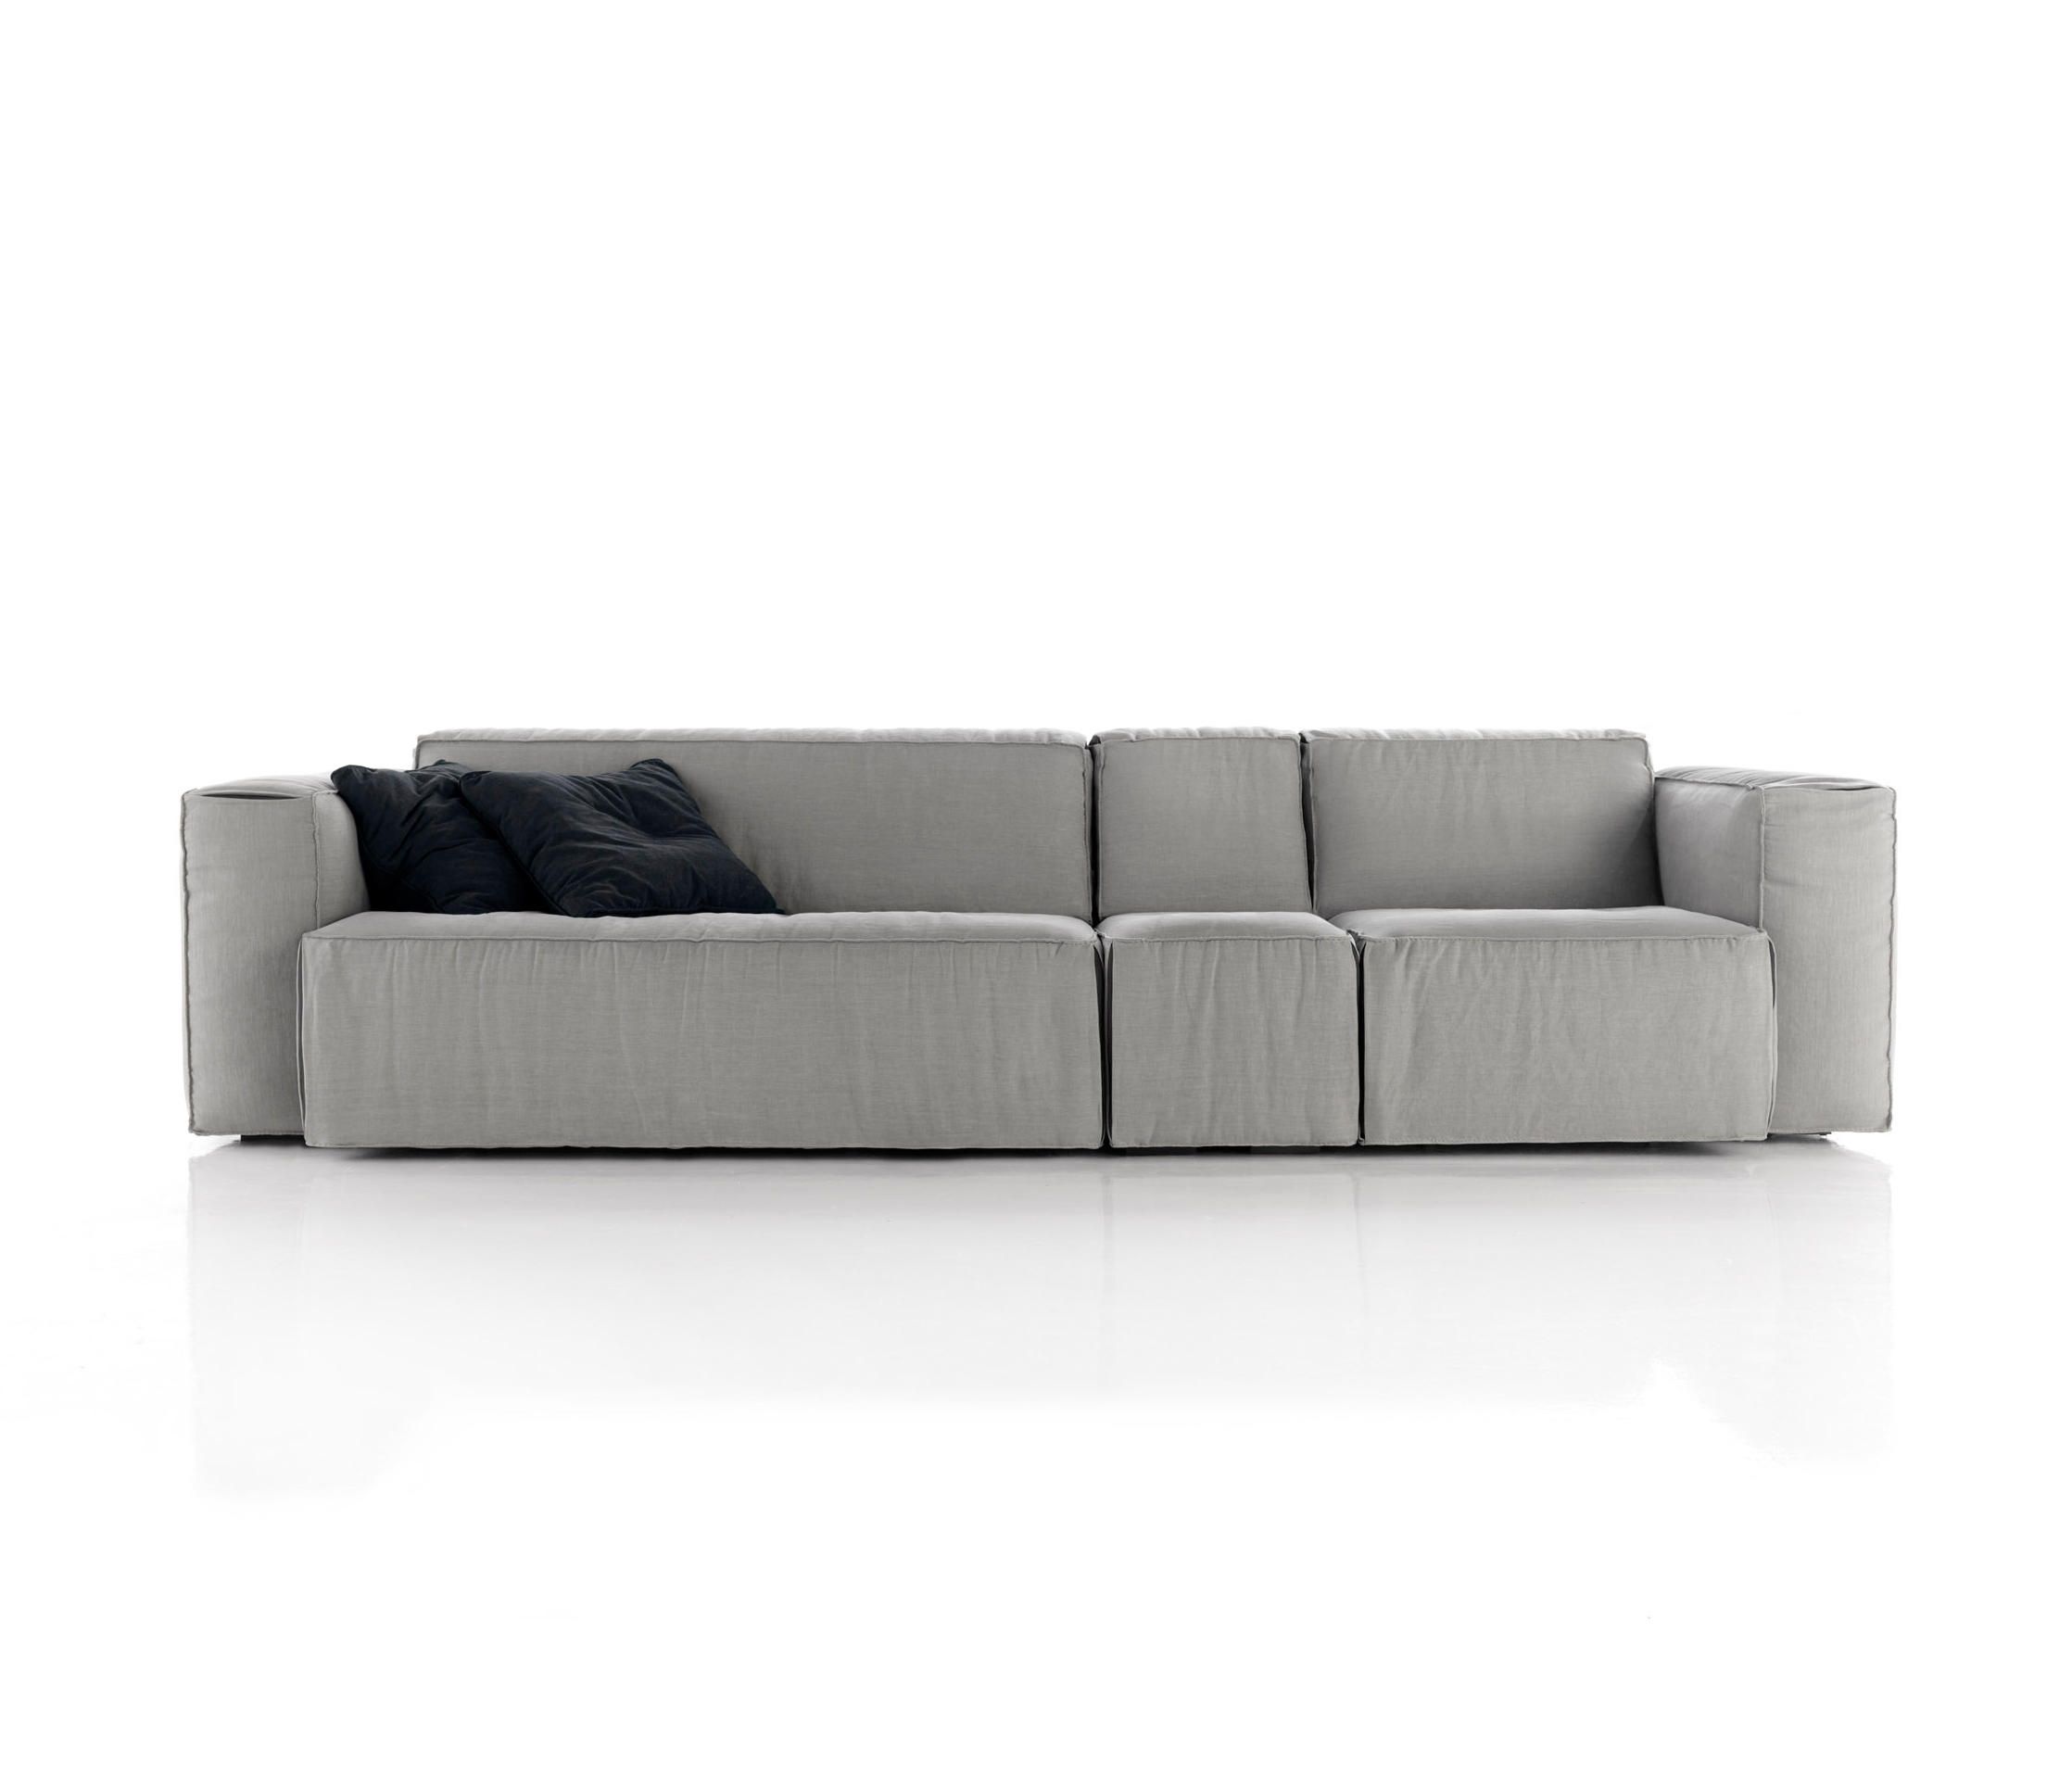 Soft Sofa – Lounge Sofas From Koo International | Architonic With Regard To Soft Sofas (Photo 6 of 10)